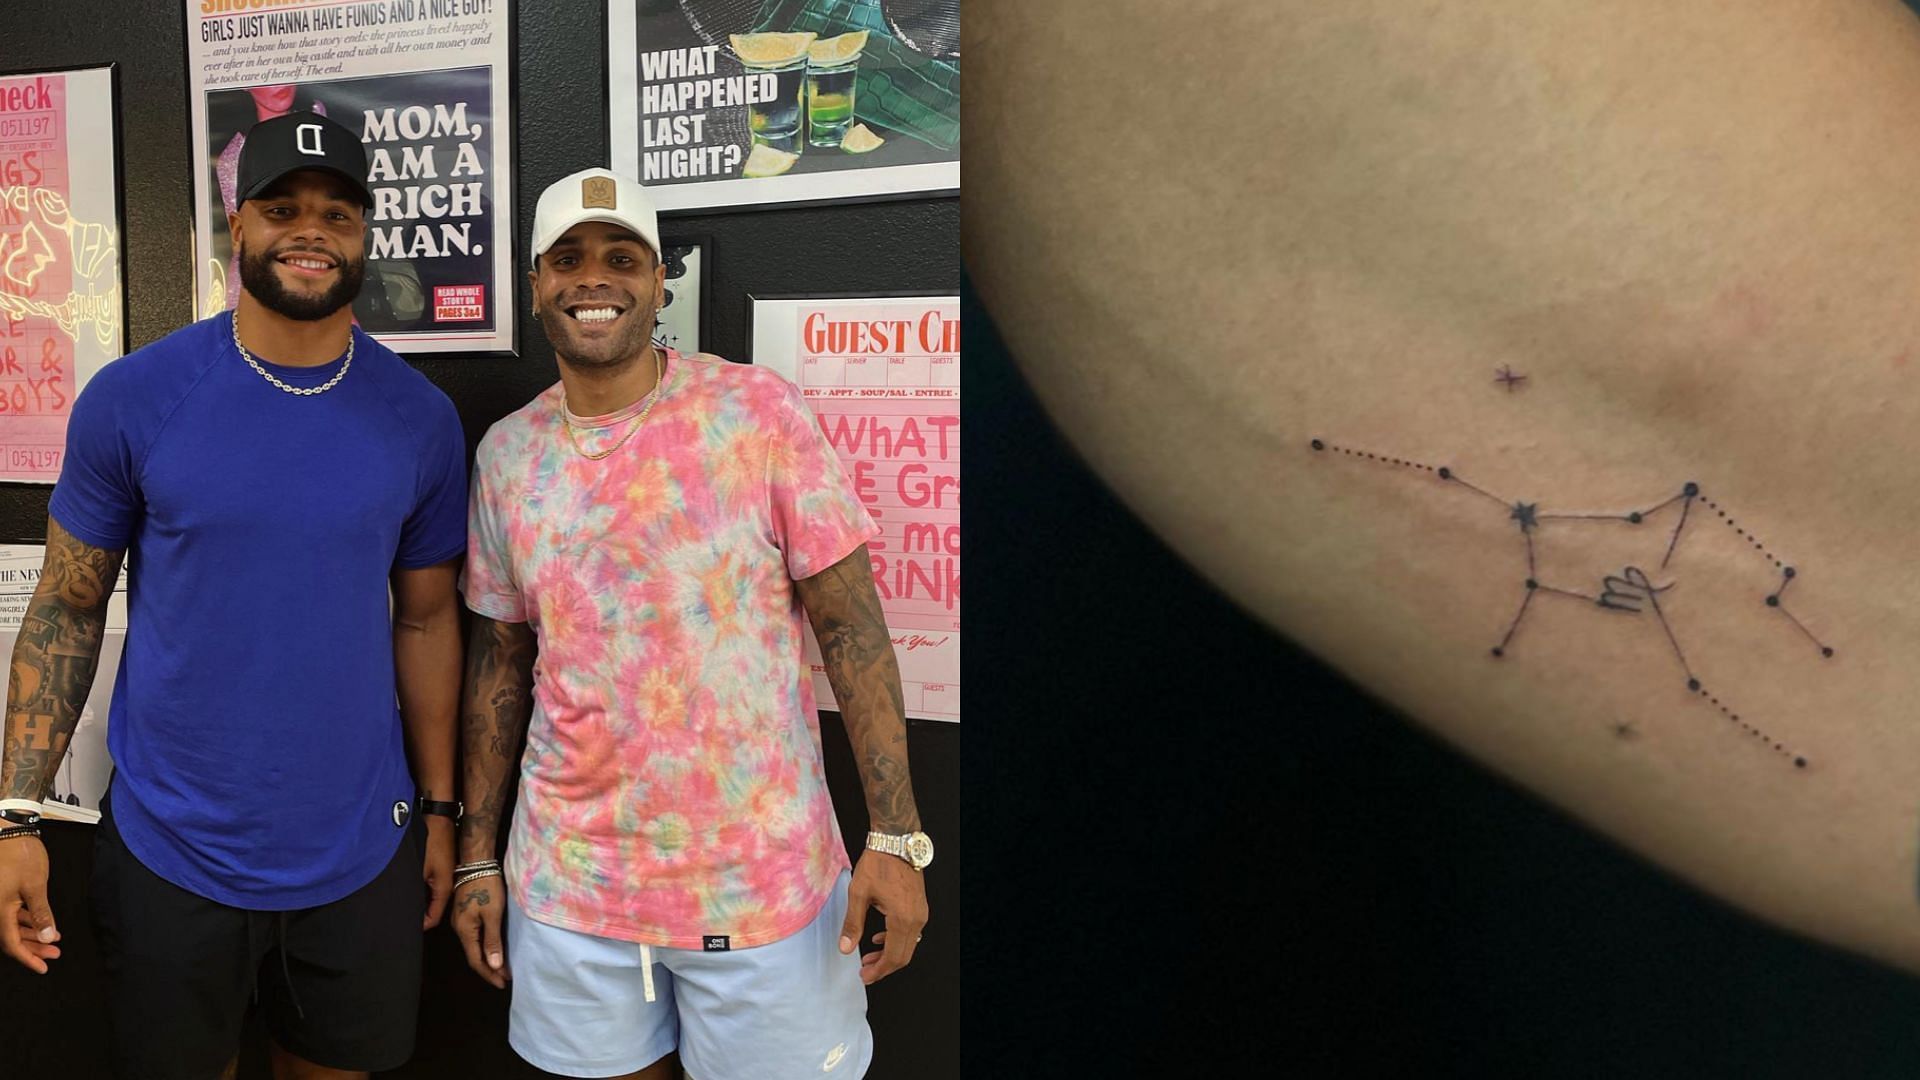 Dak Prescott and his brother Tad (L) gets tattoos to honor their late mother